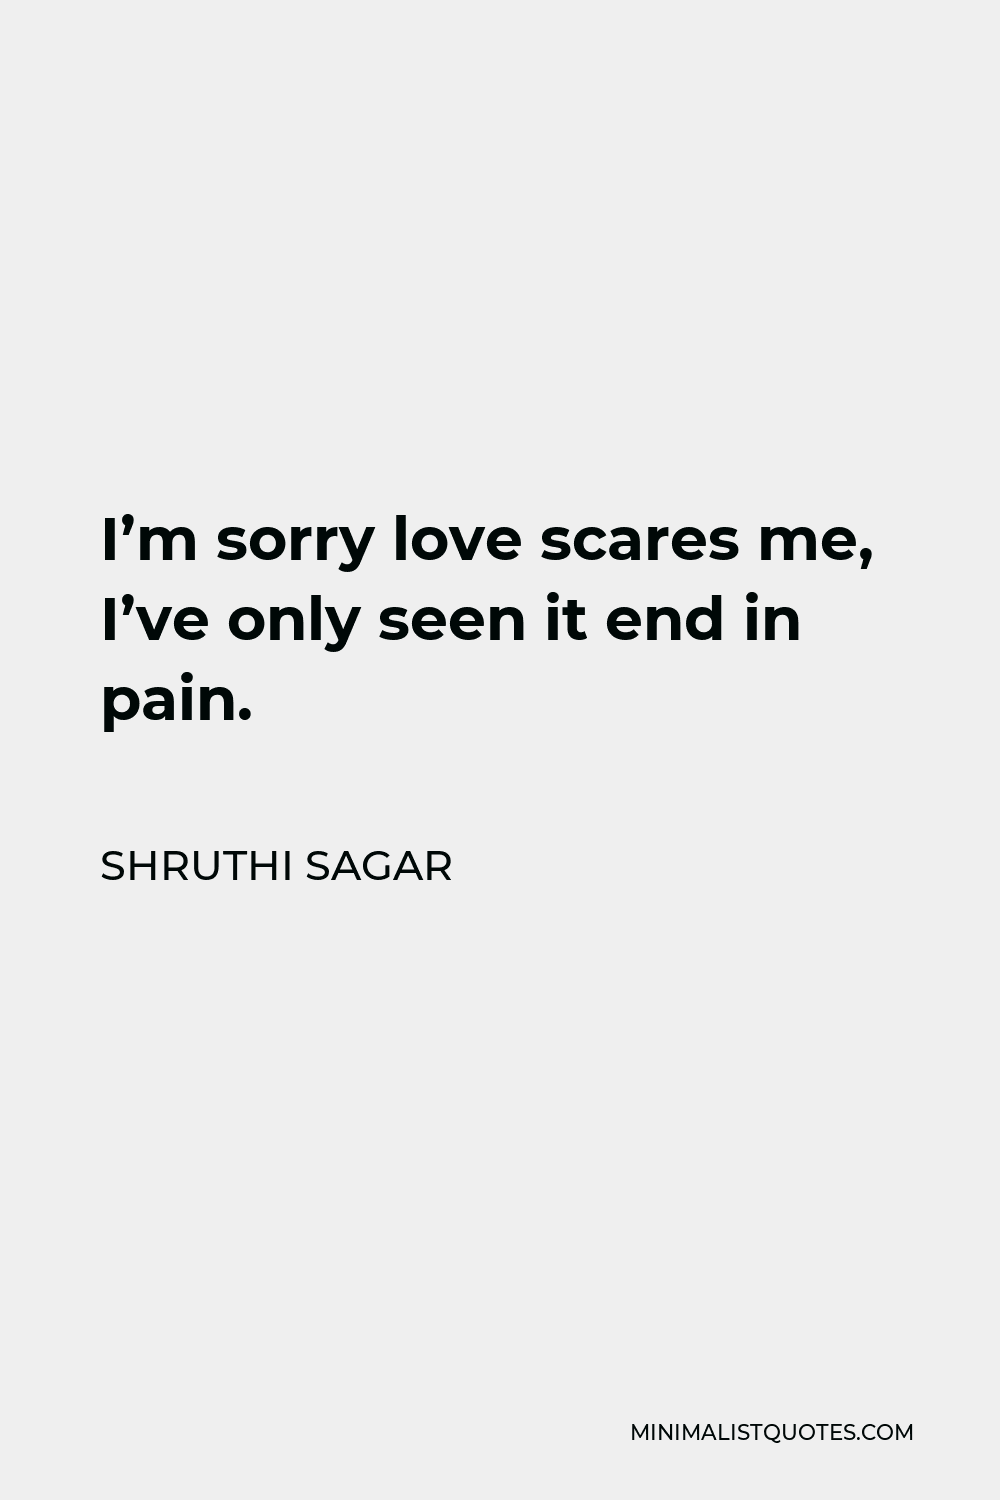 Shruthi Sagar Quote - I’m sorry love scares me, I’ve only seen it end in pain.